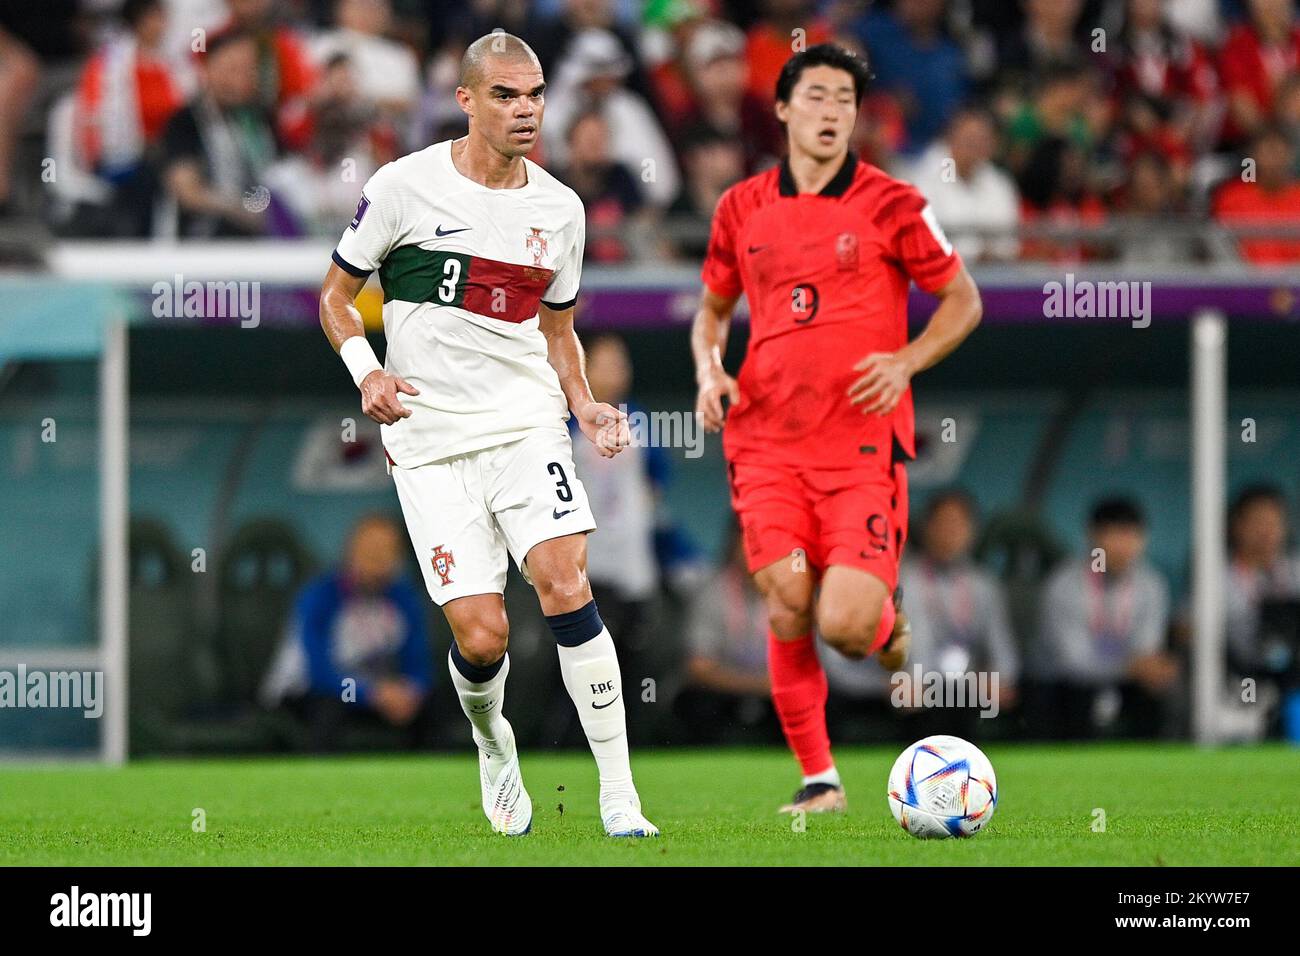 AL RAYYAN, QATAR - DECEMBER 2: Pepe of Portugal passes the ball during the Group H - FIFA World Cup Qatar 2022 match between Korea Republic and Portugal at the Education City Stadium on December 2, 2022 in Al Rayyan, Qatar (Photo by Pablo Morano/BSR Agency) Stock Photo